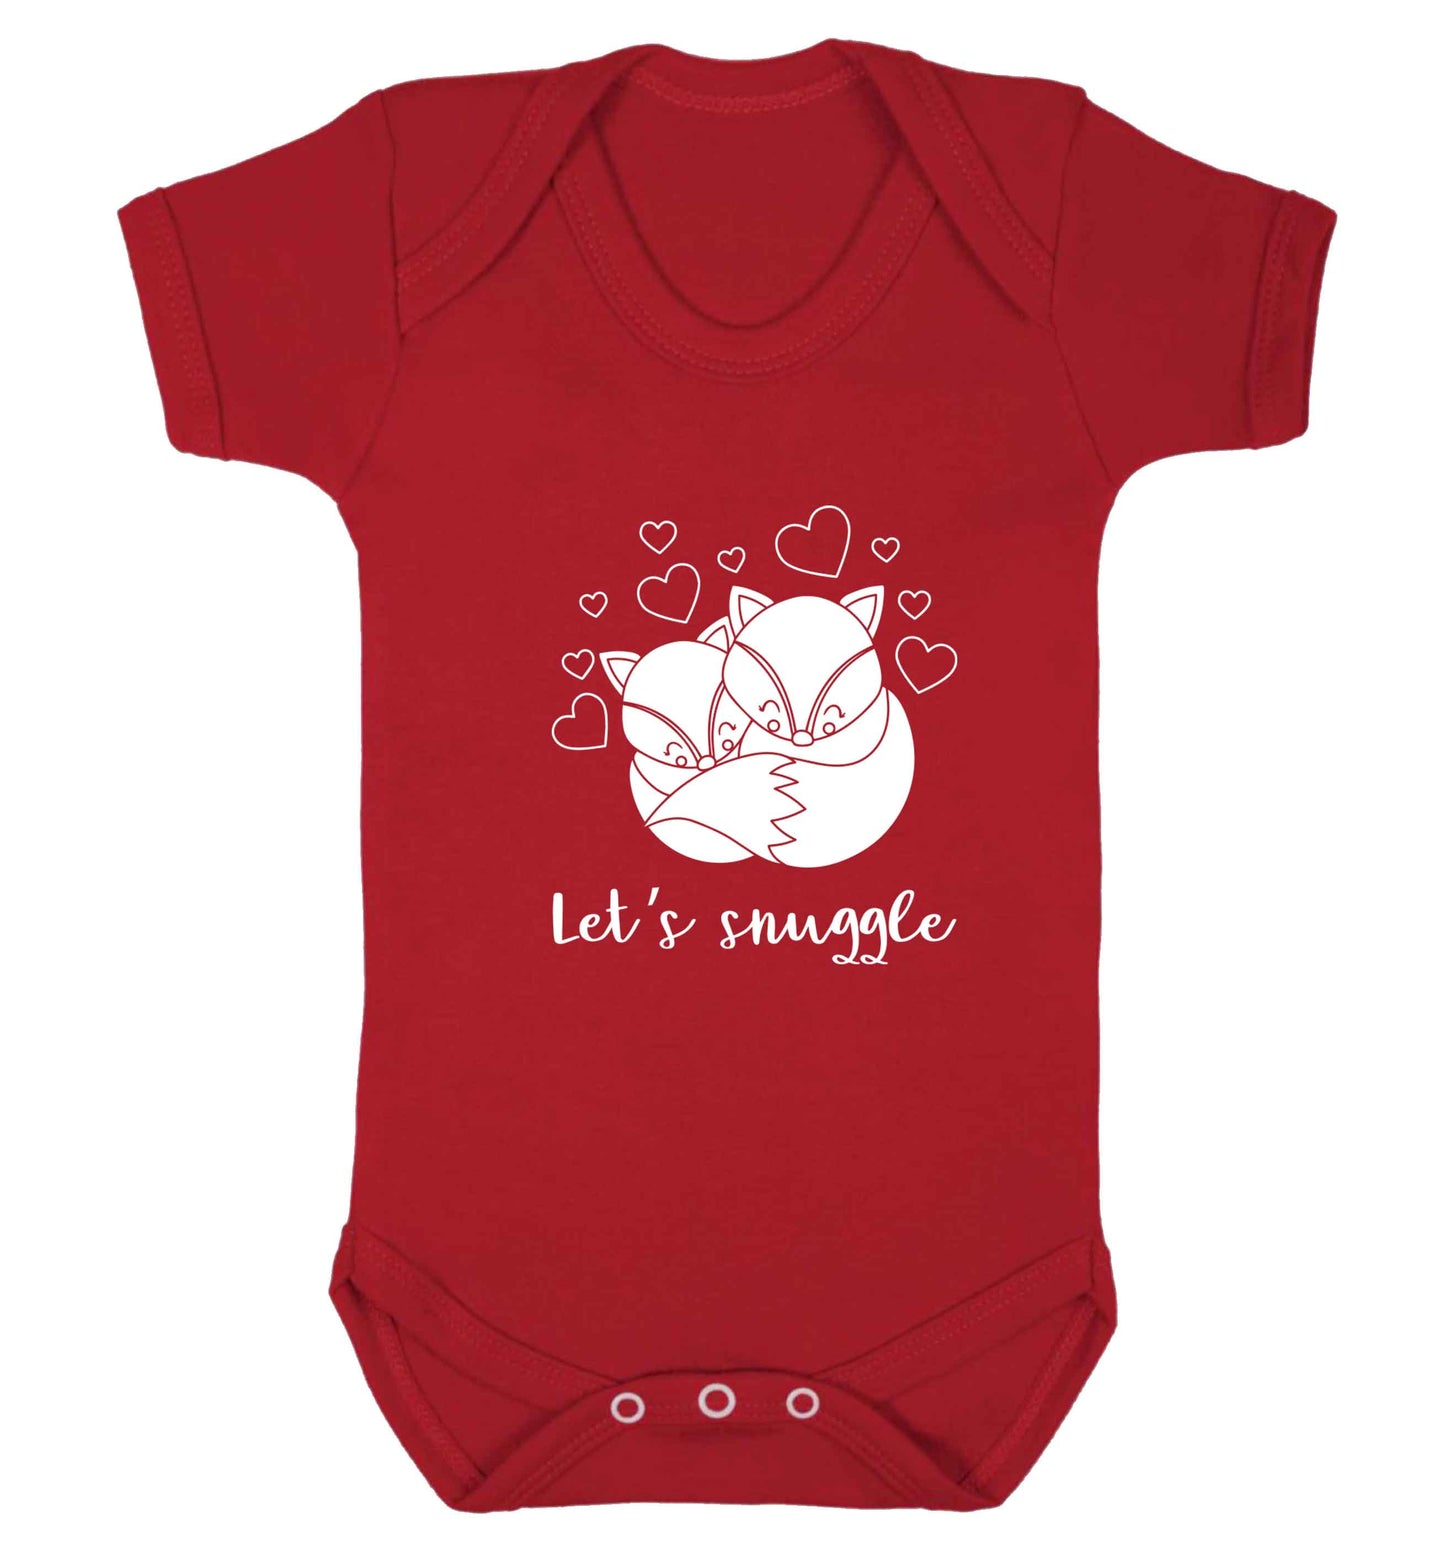 Let's snuggle baby vest red 18-24 months